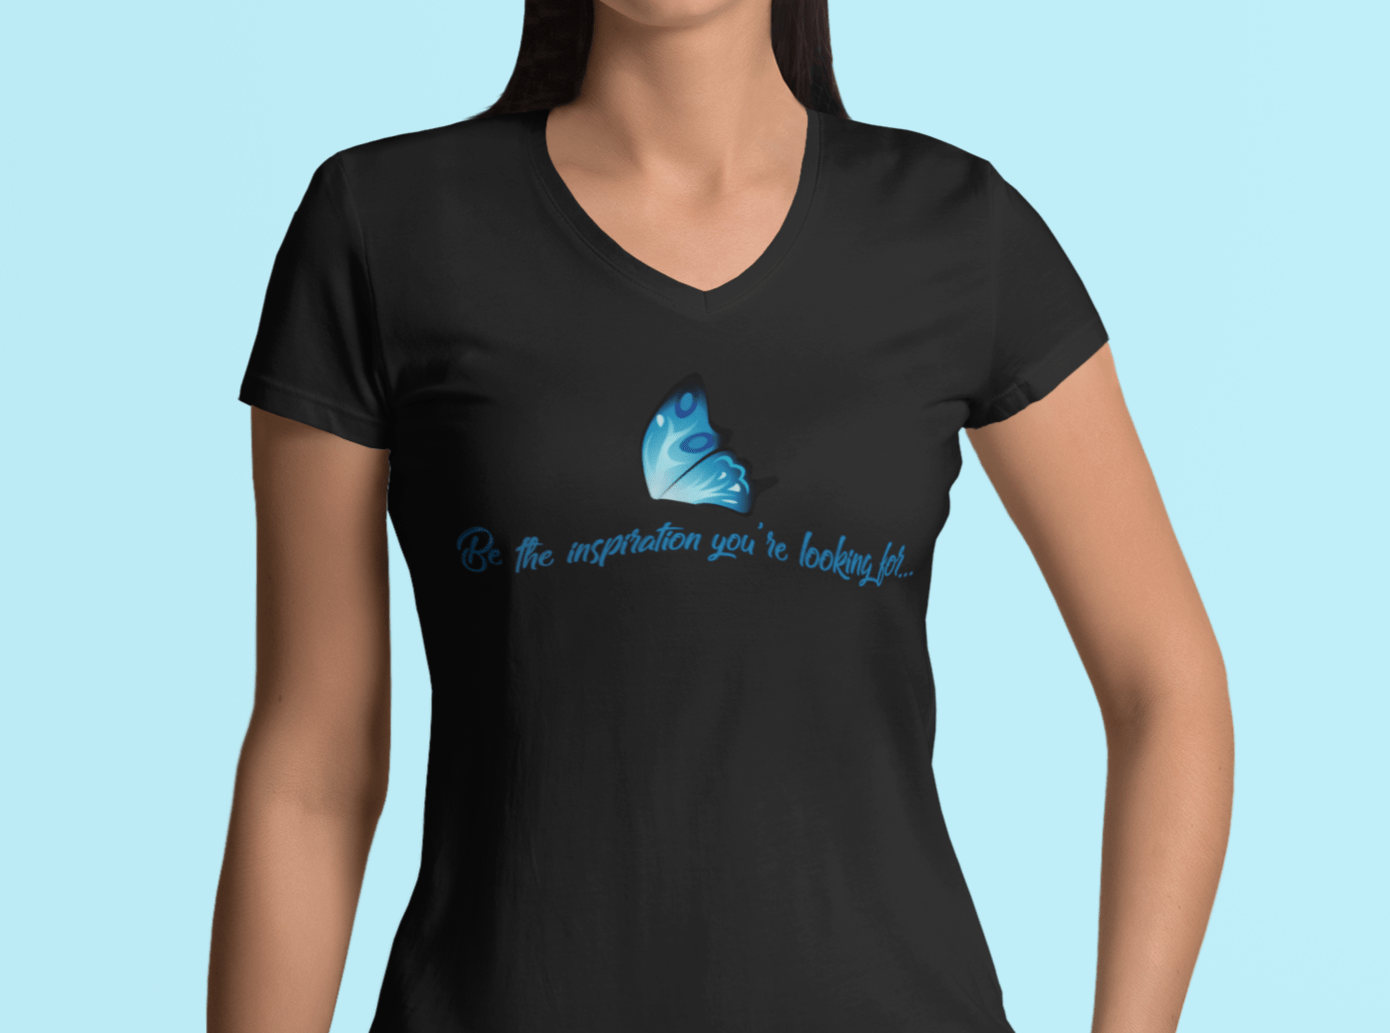 Be the inspiration your looking for... T-Shirt - Medium /